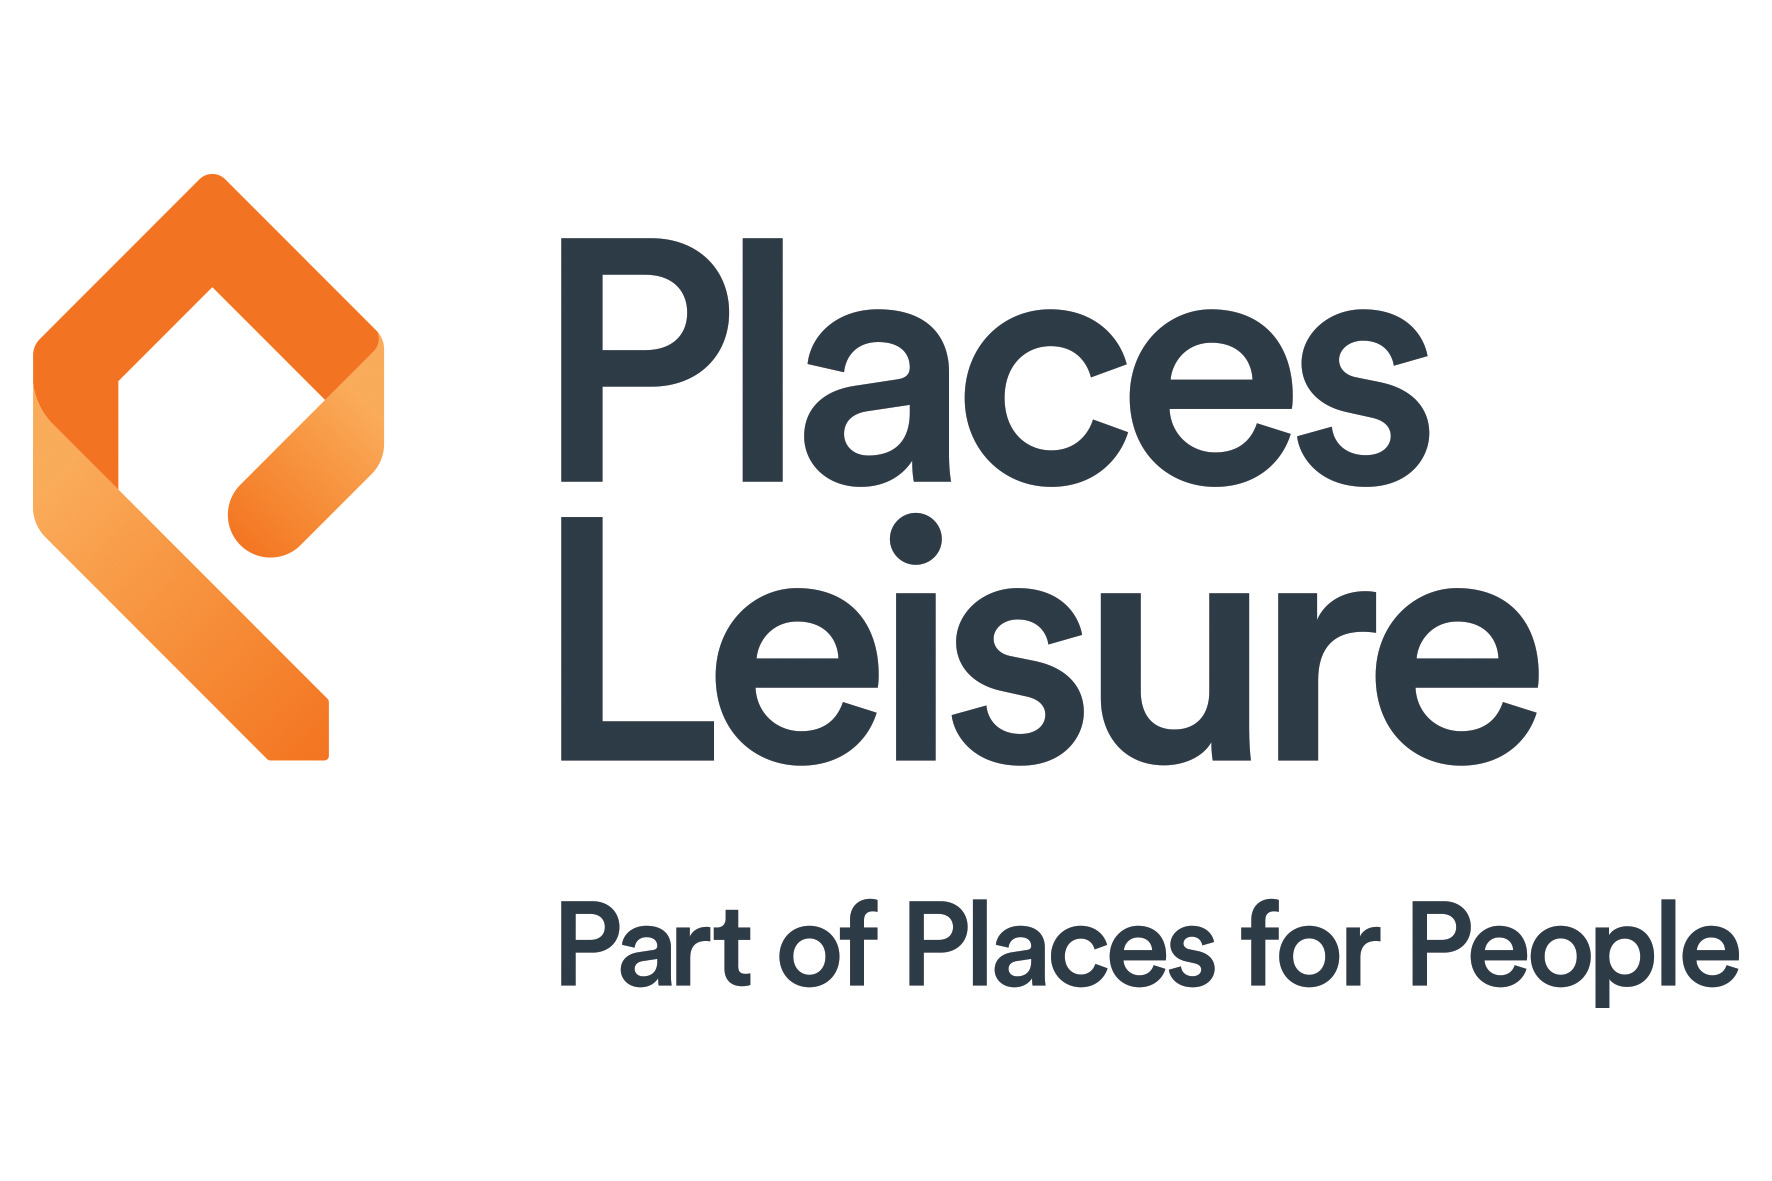 Link to https://www.placesleisure.org/centres/riverside-leisure-centre